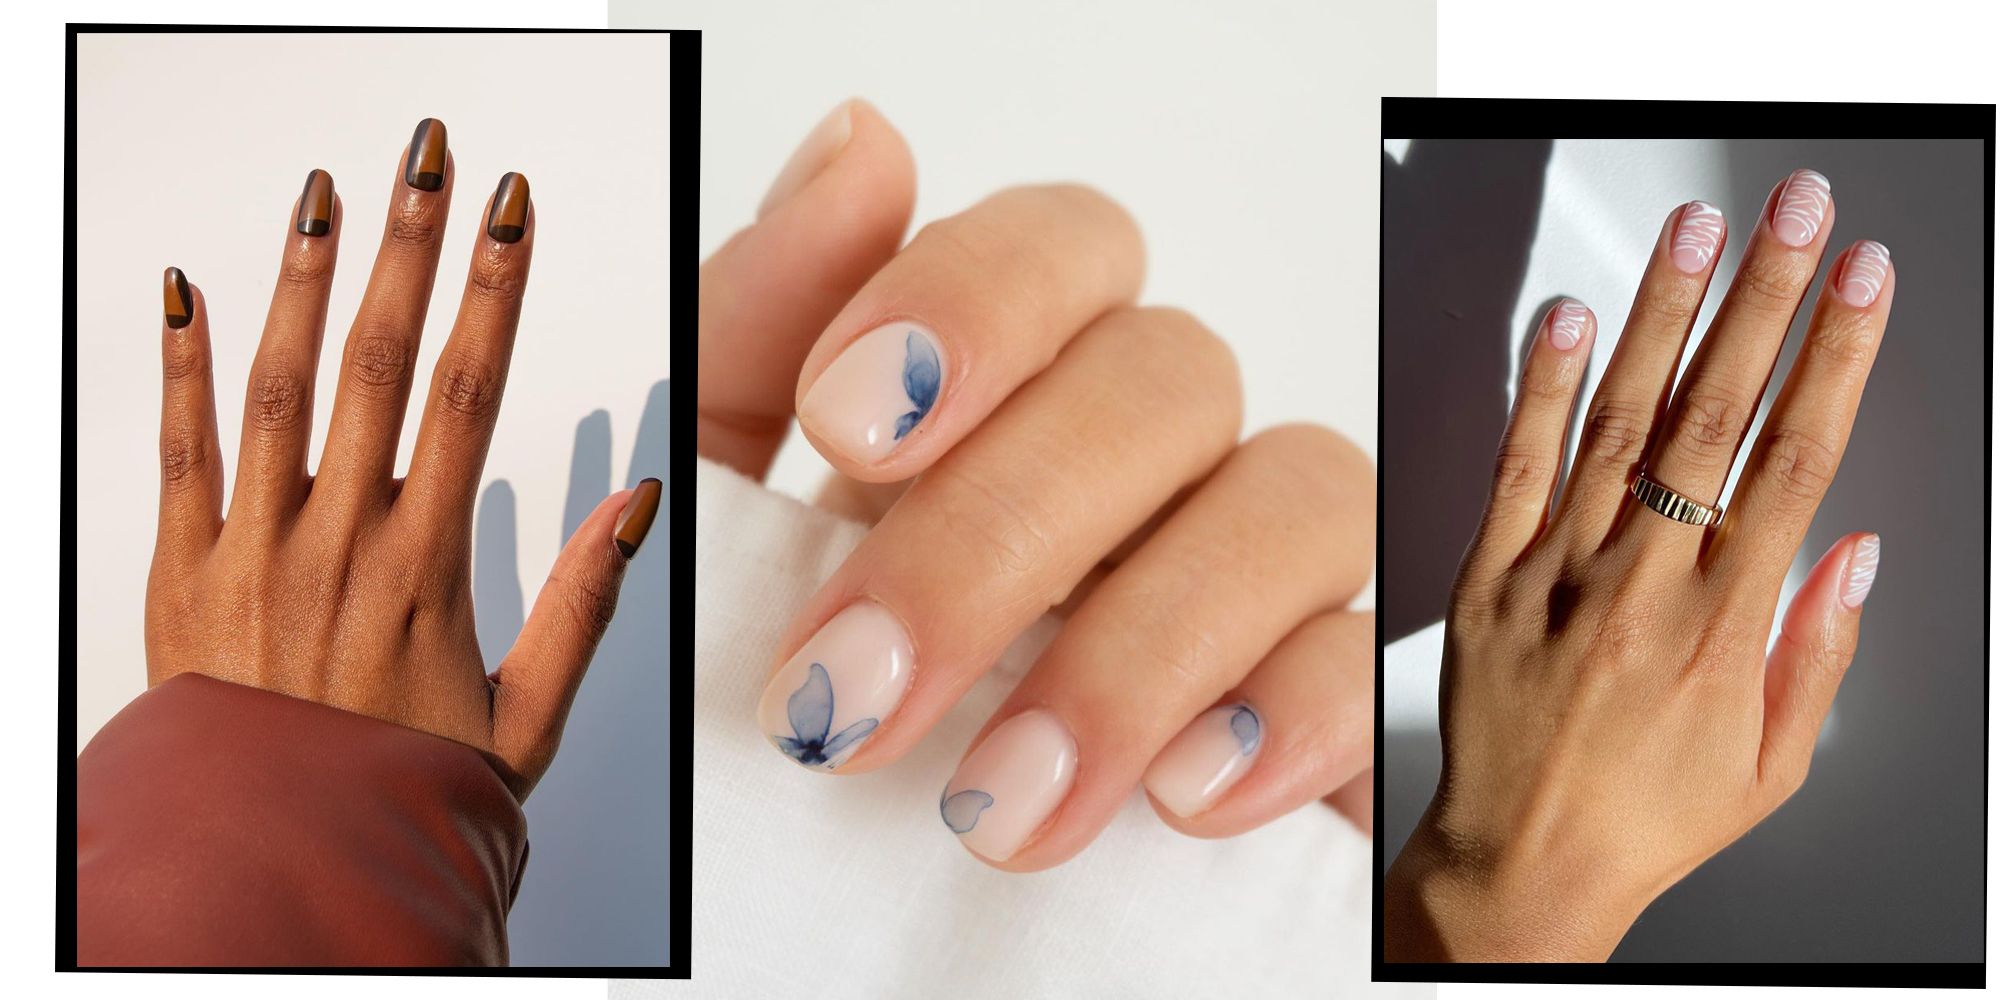 Skills Alberta – Post Secondary Aesthetics Competition Manicure, with gel  polish and nail art